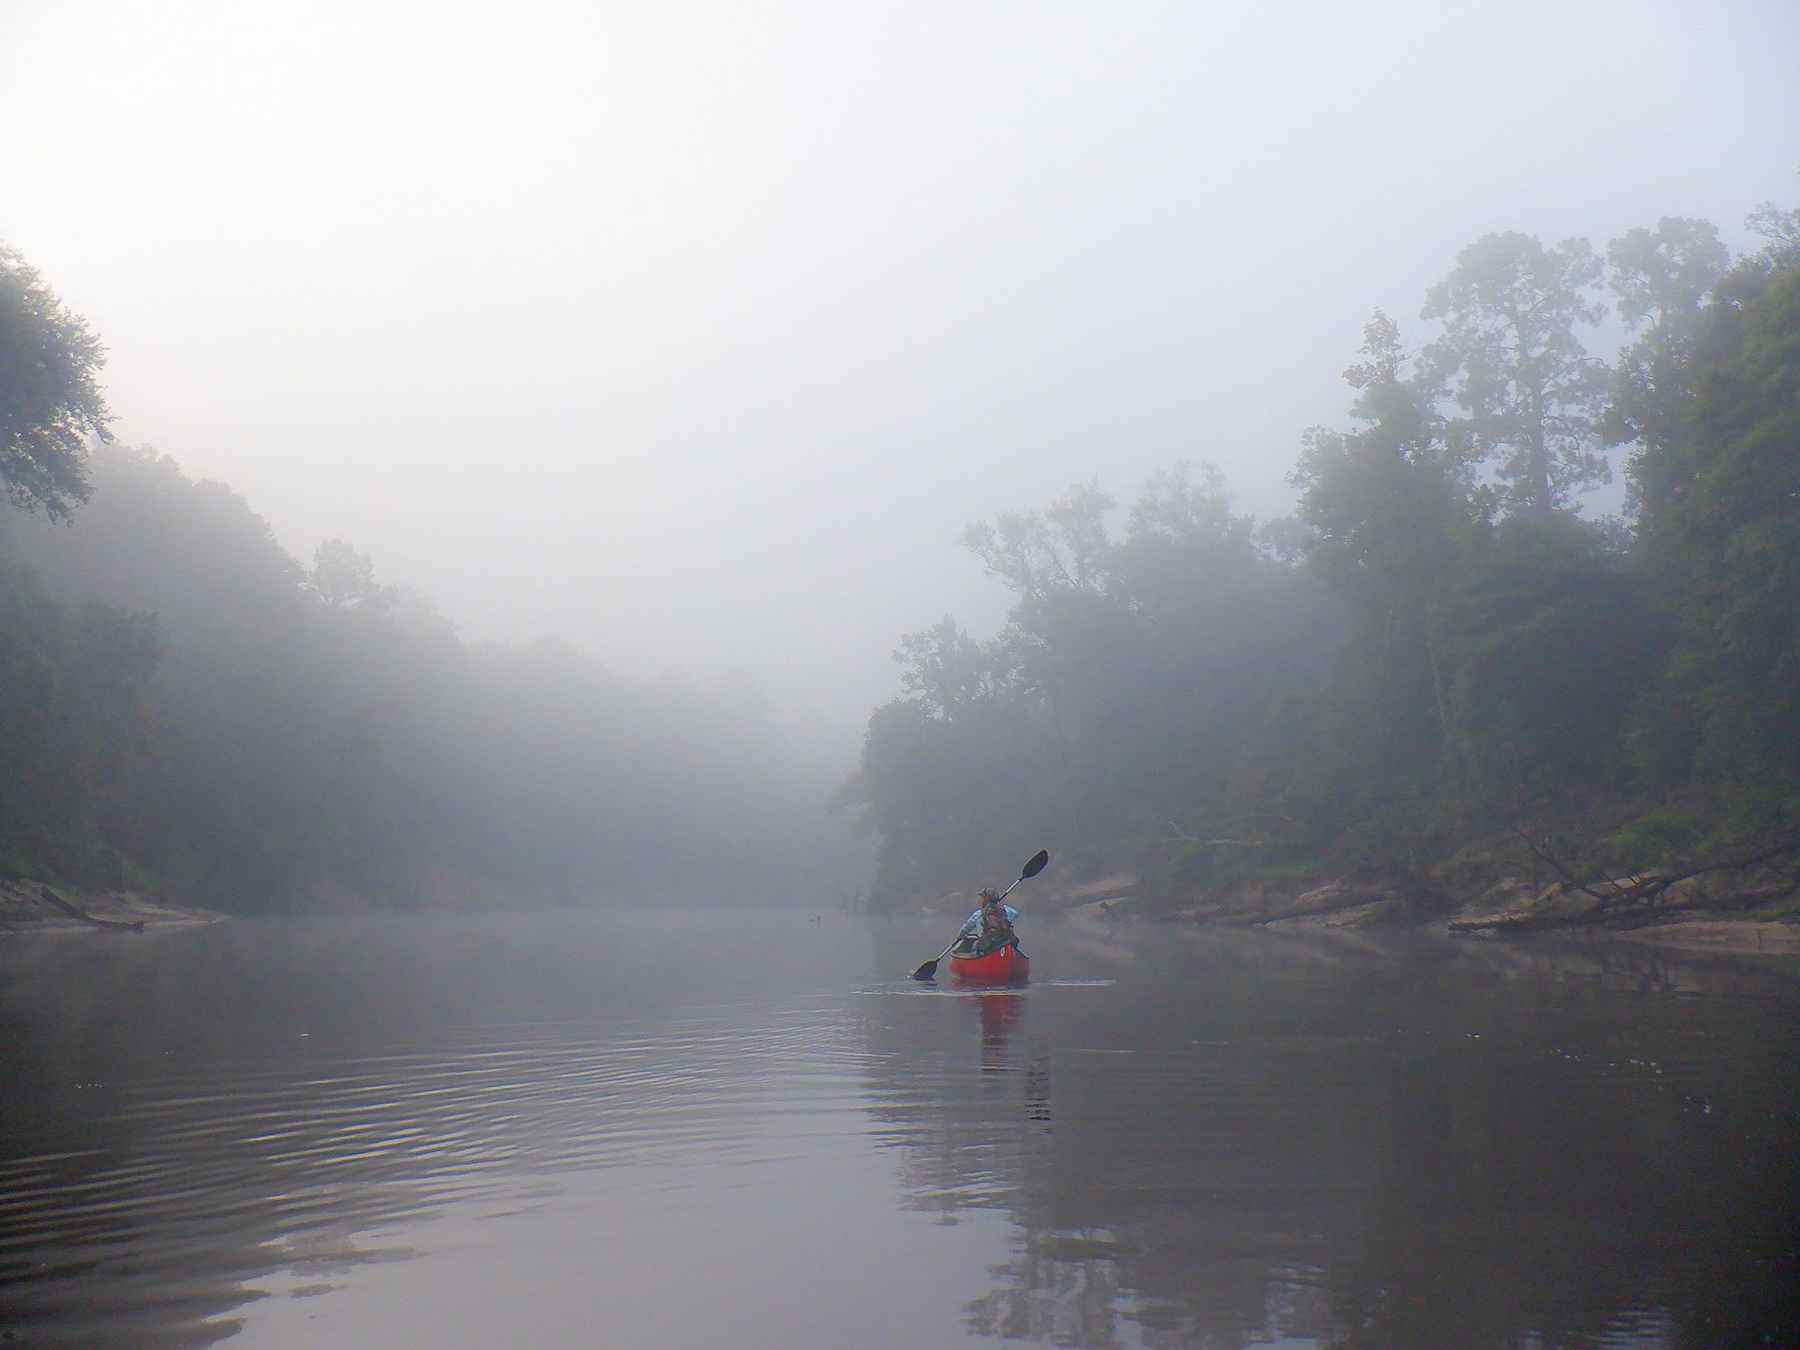 Fishing pole early morning on dark, foggy river Stock Photo by